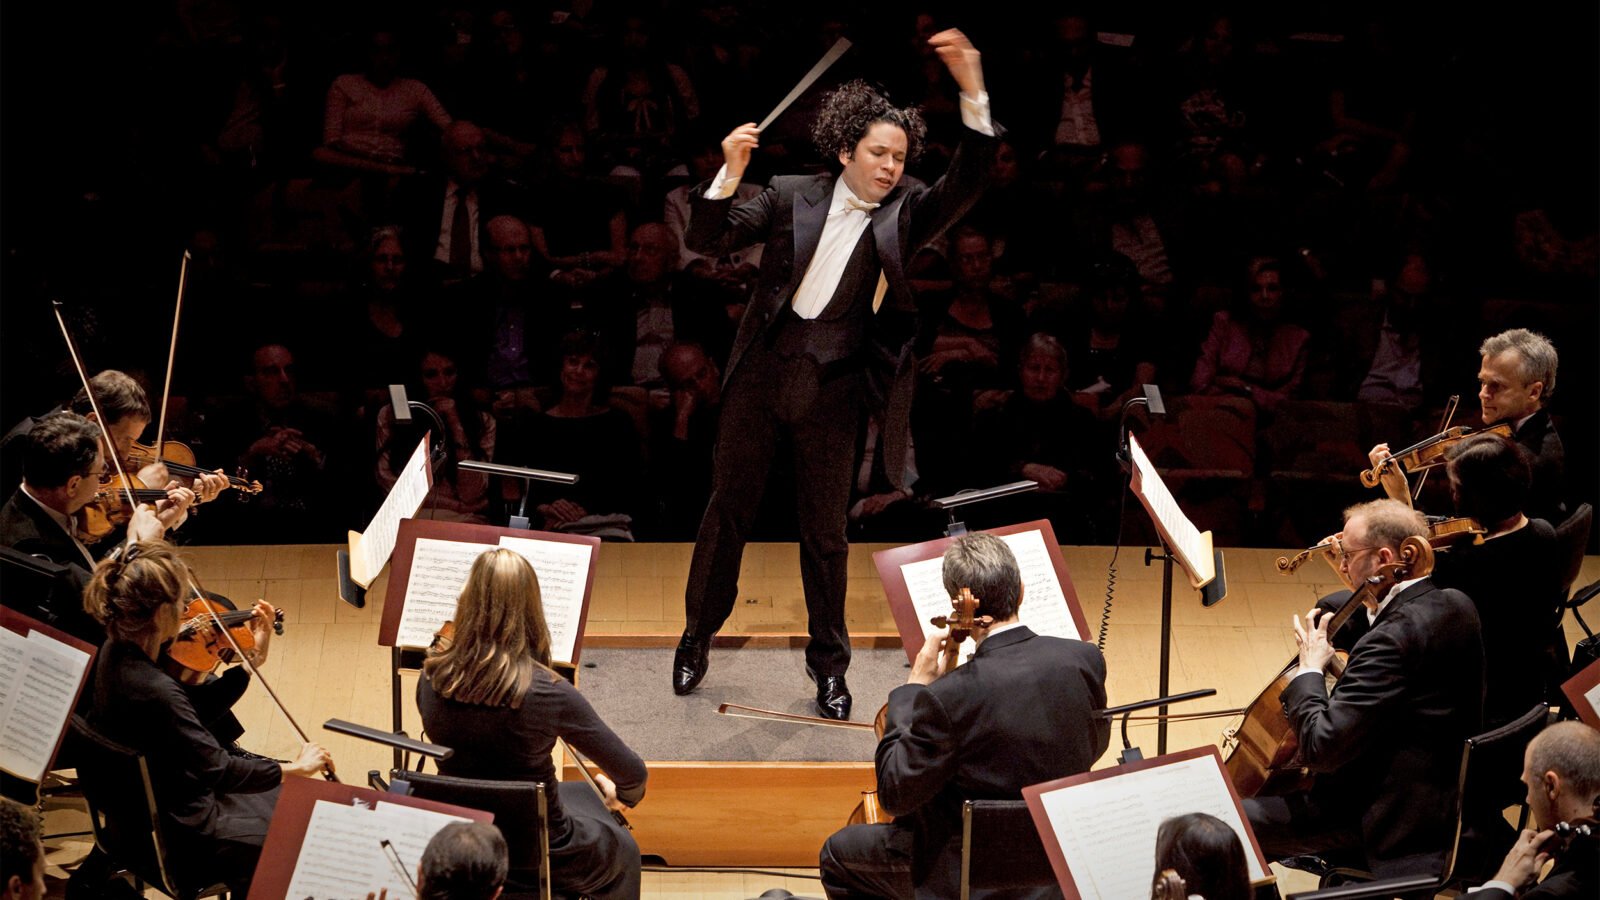 Wife of Gustavo Dudamel, L.A. Philharmonic conductor, files for